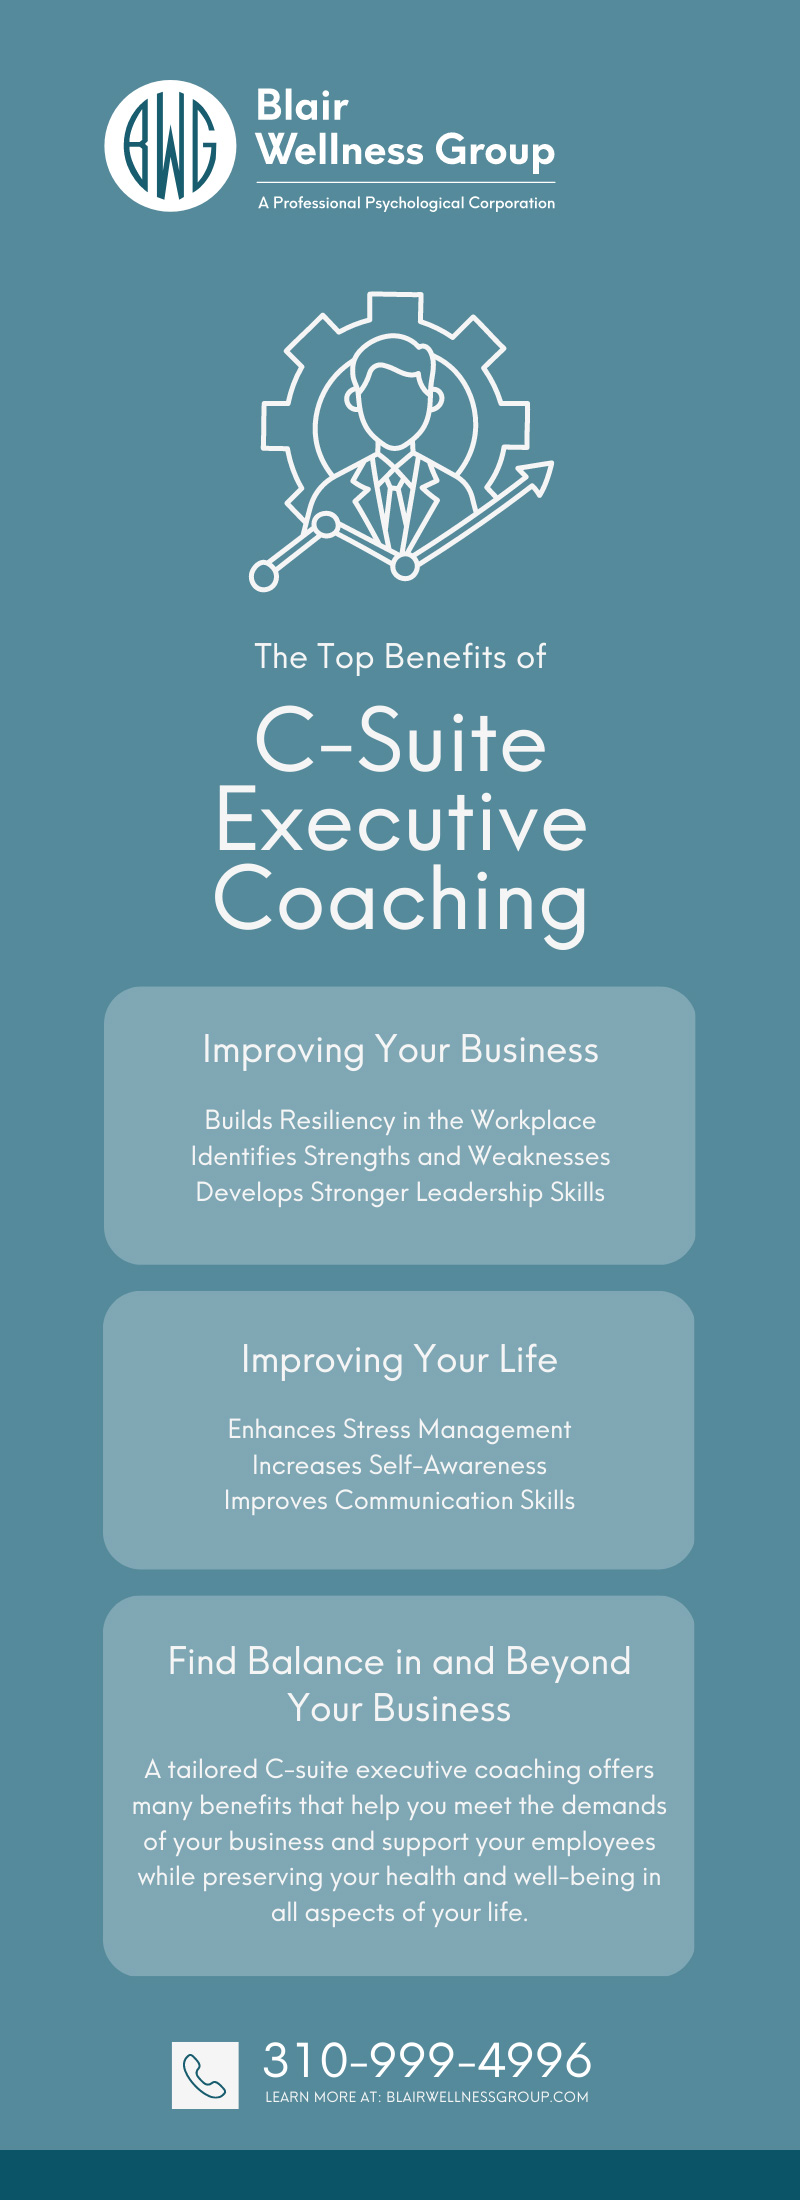 The Top Benefits of C-Suite Executive Coaching